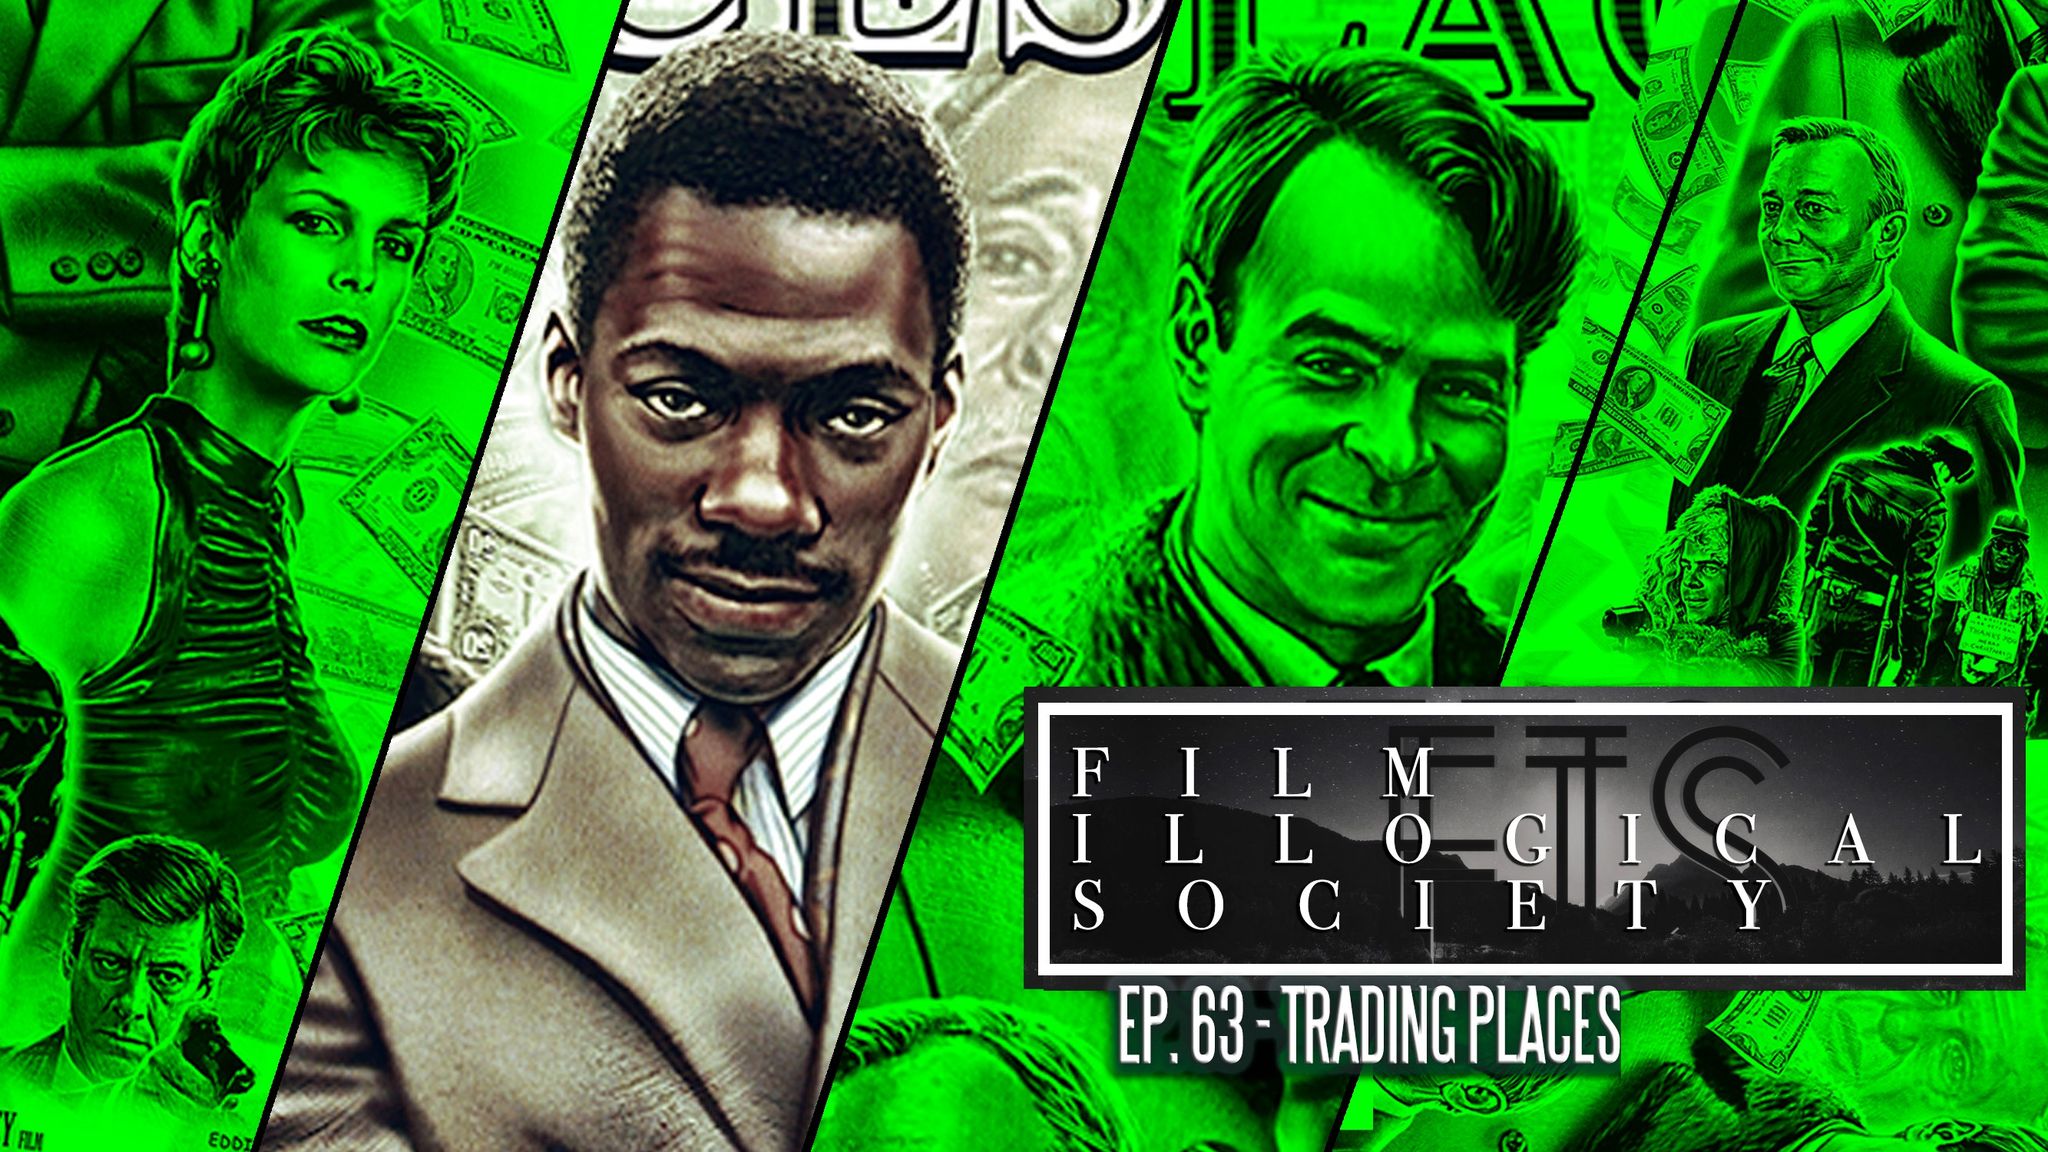 63 – Trading Places